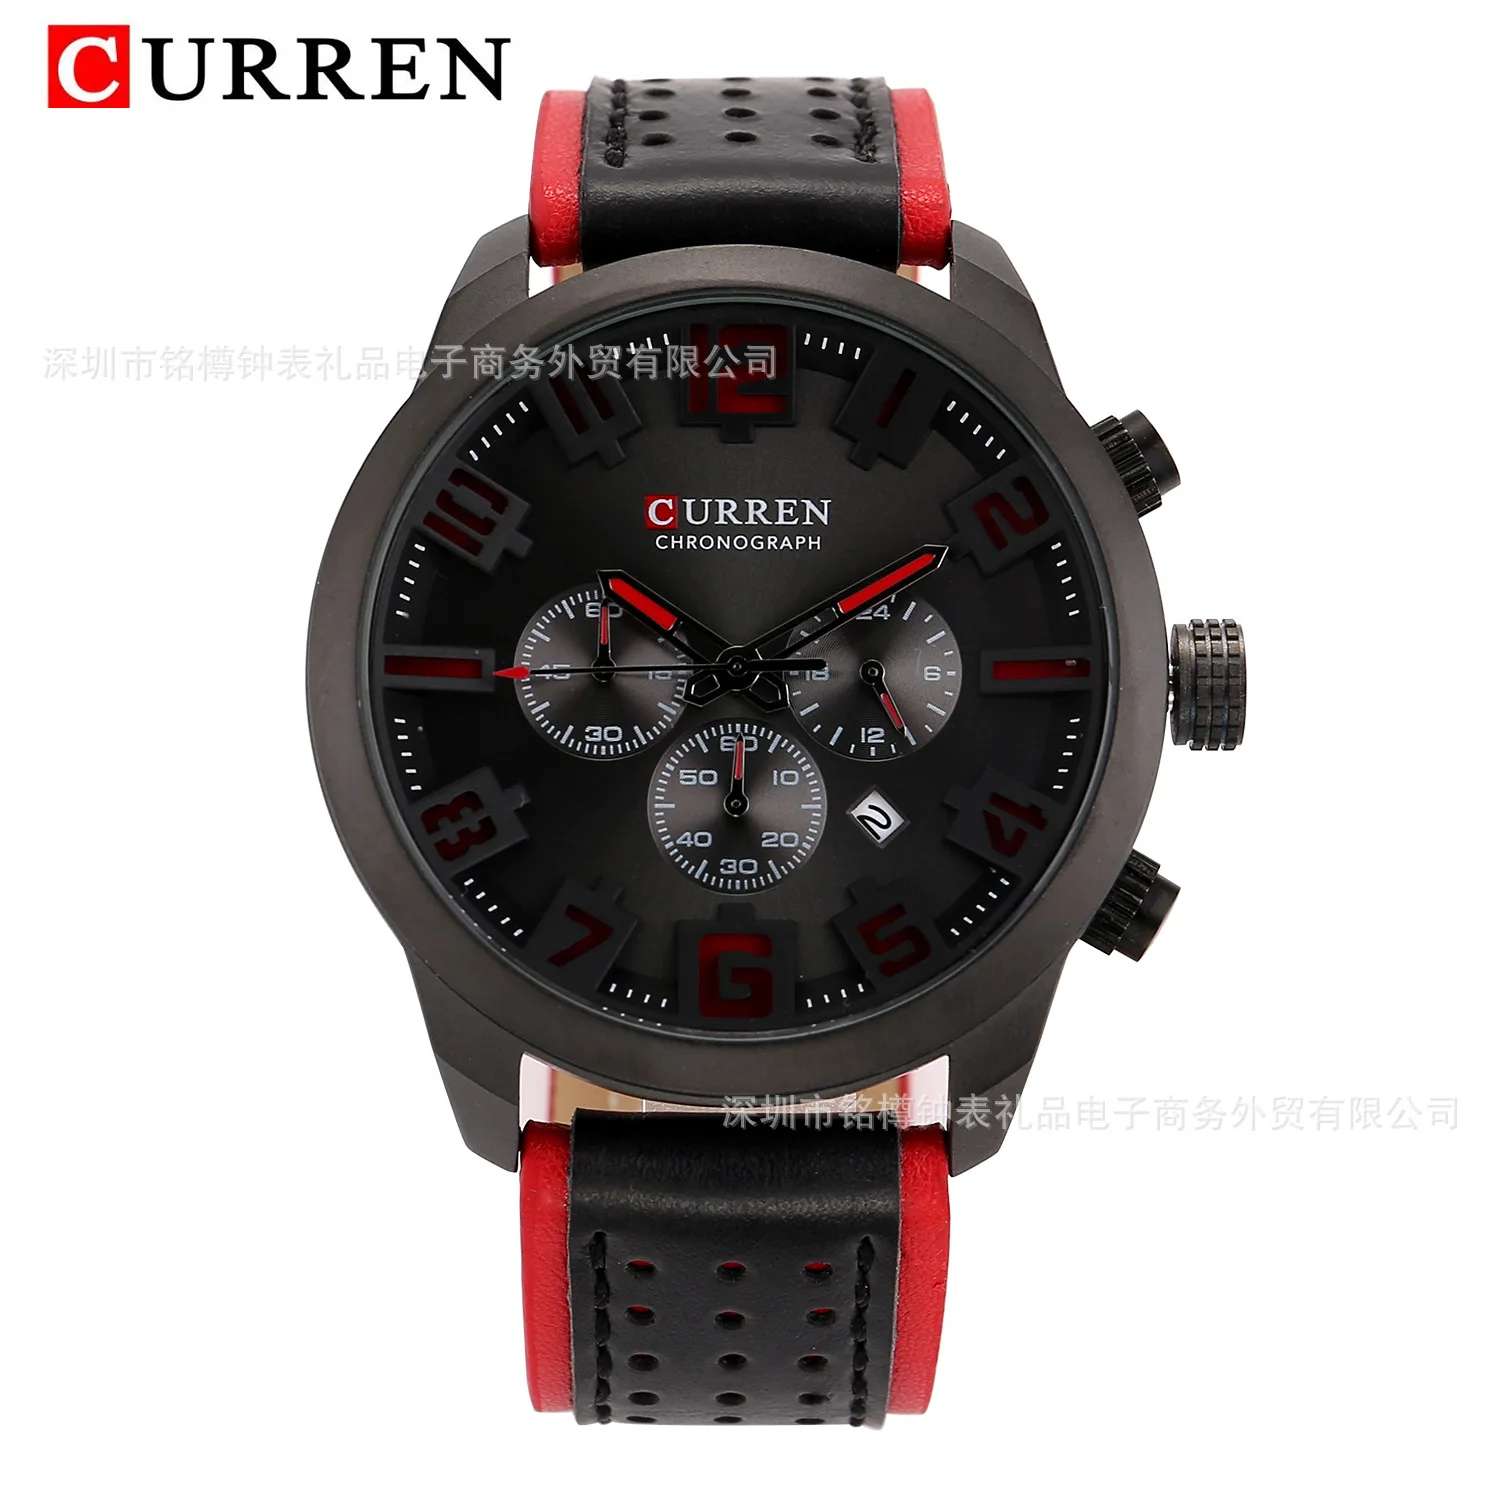 

Men Watches Curren Top Luxury Brand Mens Chronograph Military Sport Watch Male Waterproof Leather Army Quartz Analog Clock